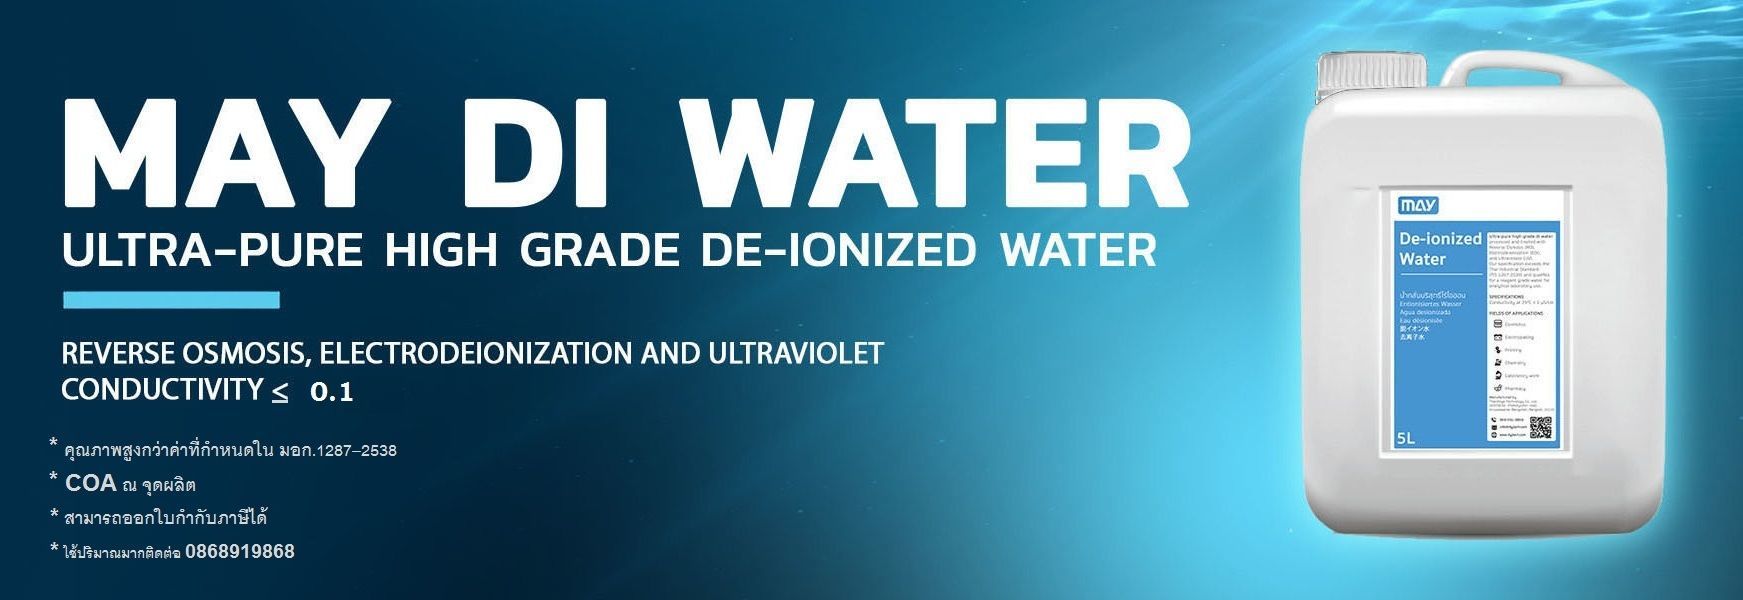 Deionized water for industrial and medical use